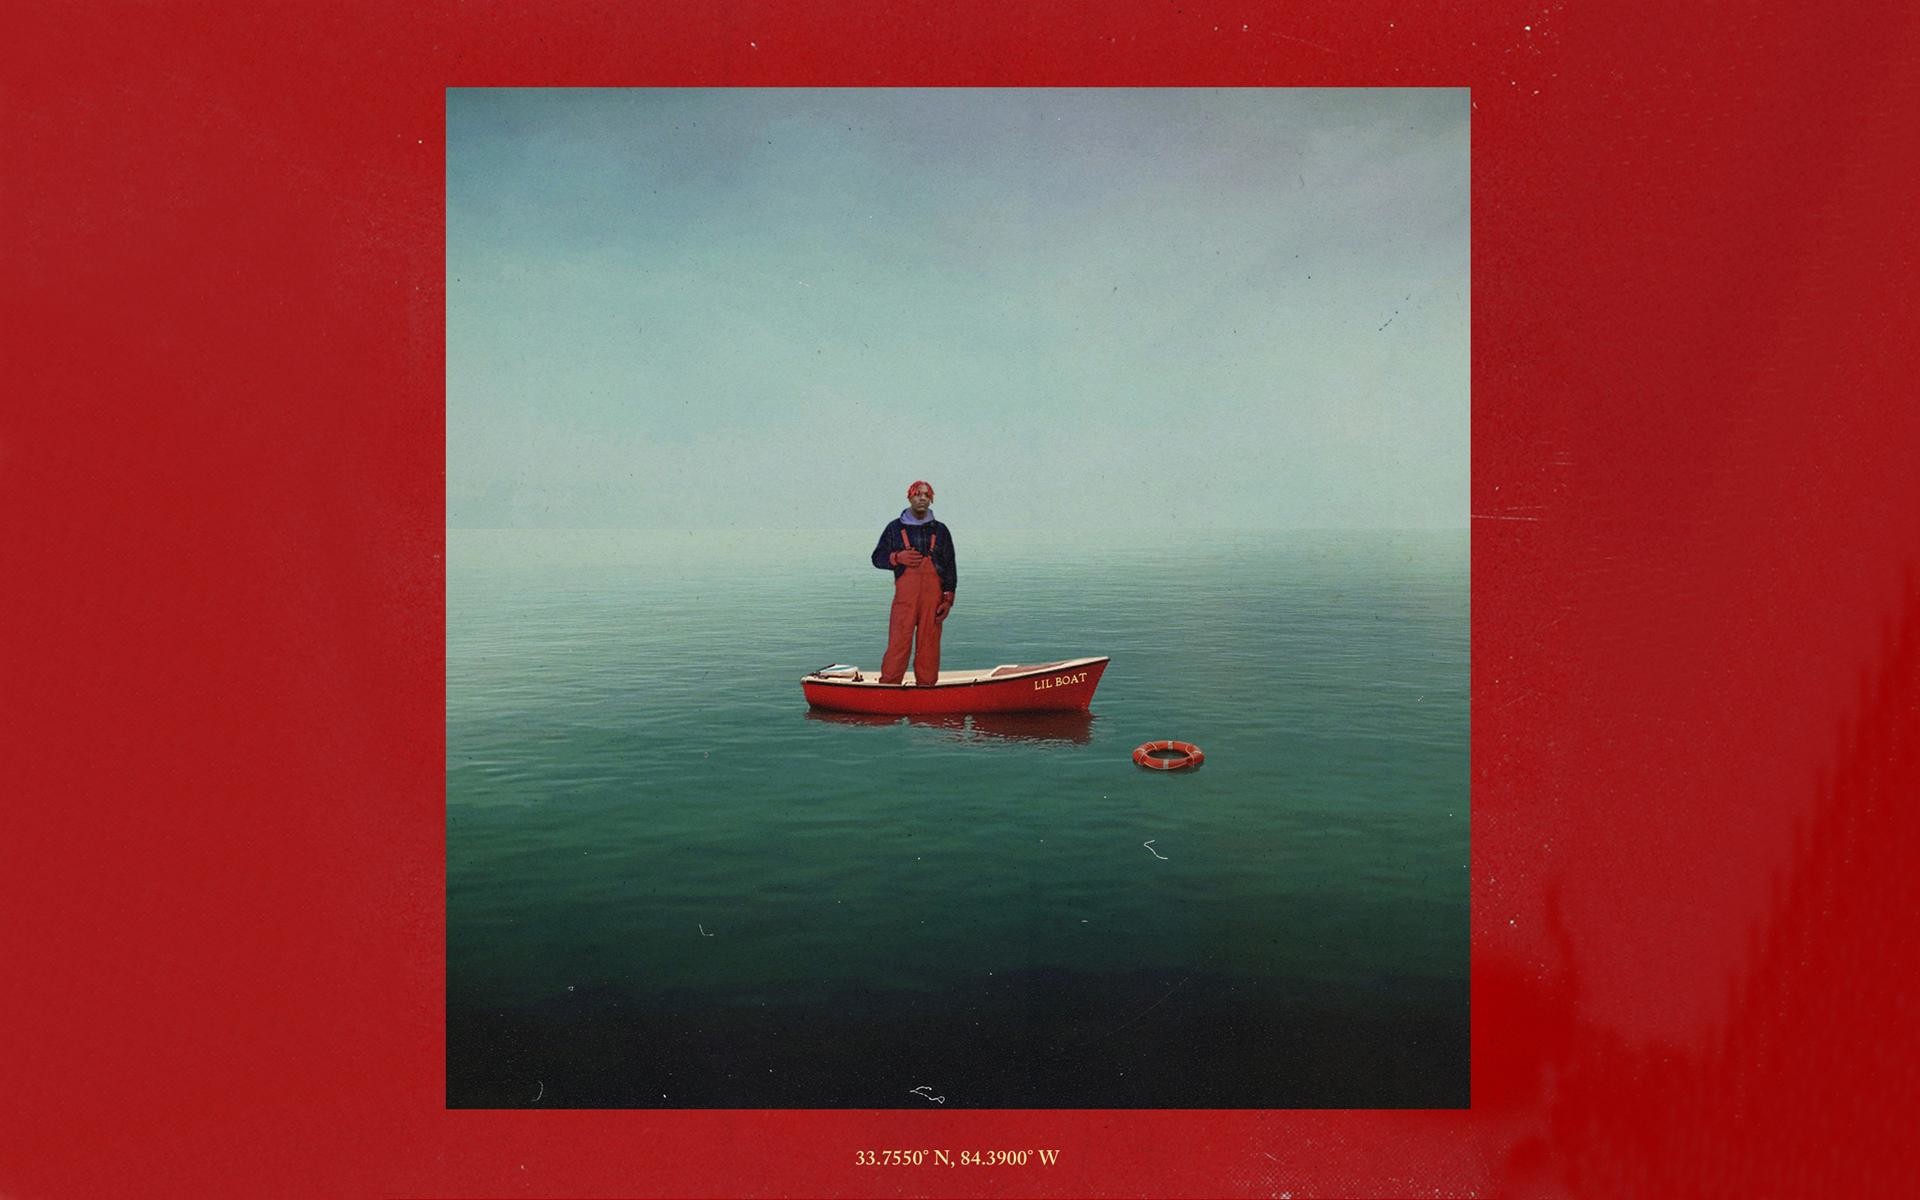 I Made A Lil Yachty Wallpaper While Listening To Summer - Lil Yachty Wallpaper Mac - HD Wallpaper 